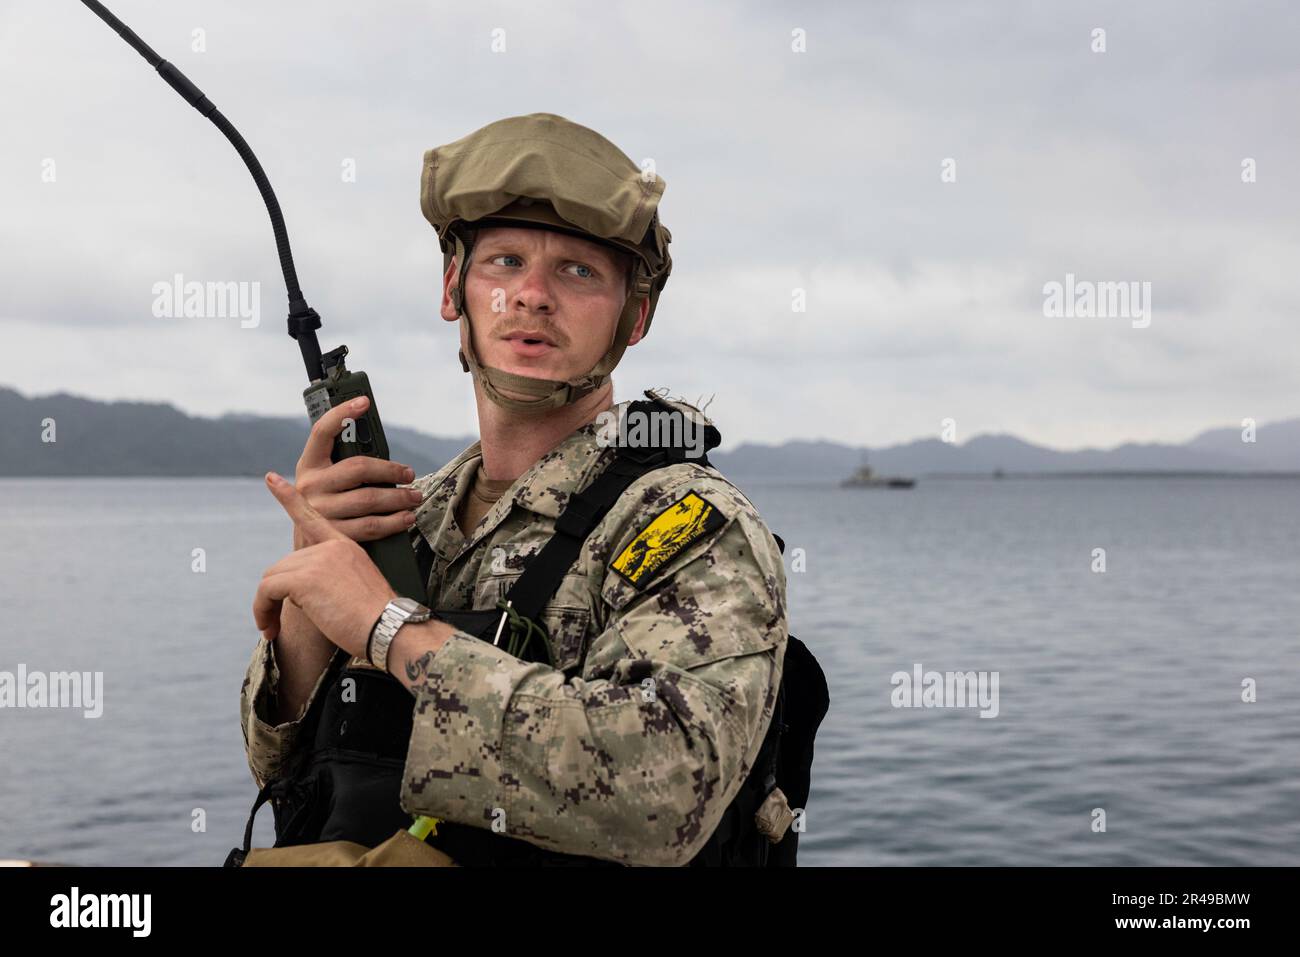 U.S. Navy Sailor Engineman 2nd Class Alec Sacco, with Beachmaster Unit 1, and a native of Plano, Texas, relays radio communications during a combined joint logistics over-the-shore offload in preparation for Balikatan 23 at Camp Agnew, Casiguran, Philippines, April 6, 2023. Balikatan is an annual exercise between the Armed Forces of the Philippines and U.S. military designed to strengthen bilateral interoperability, capabilities, trust, and cooperation built over decades shared experiences. Stock Photo